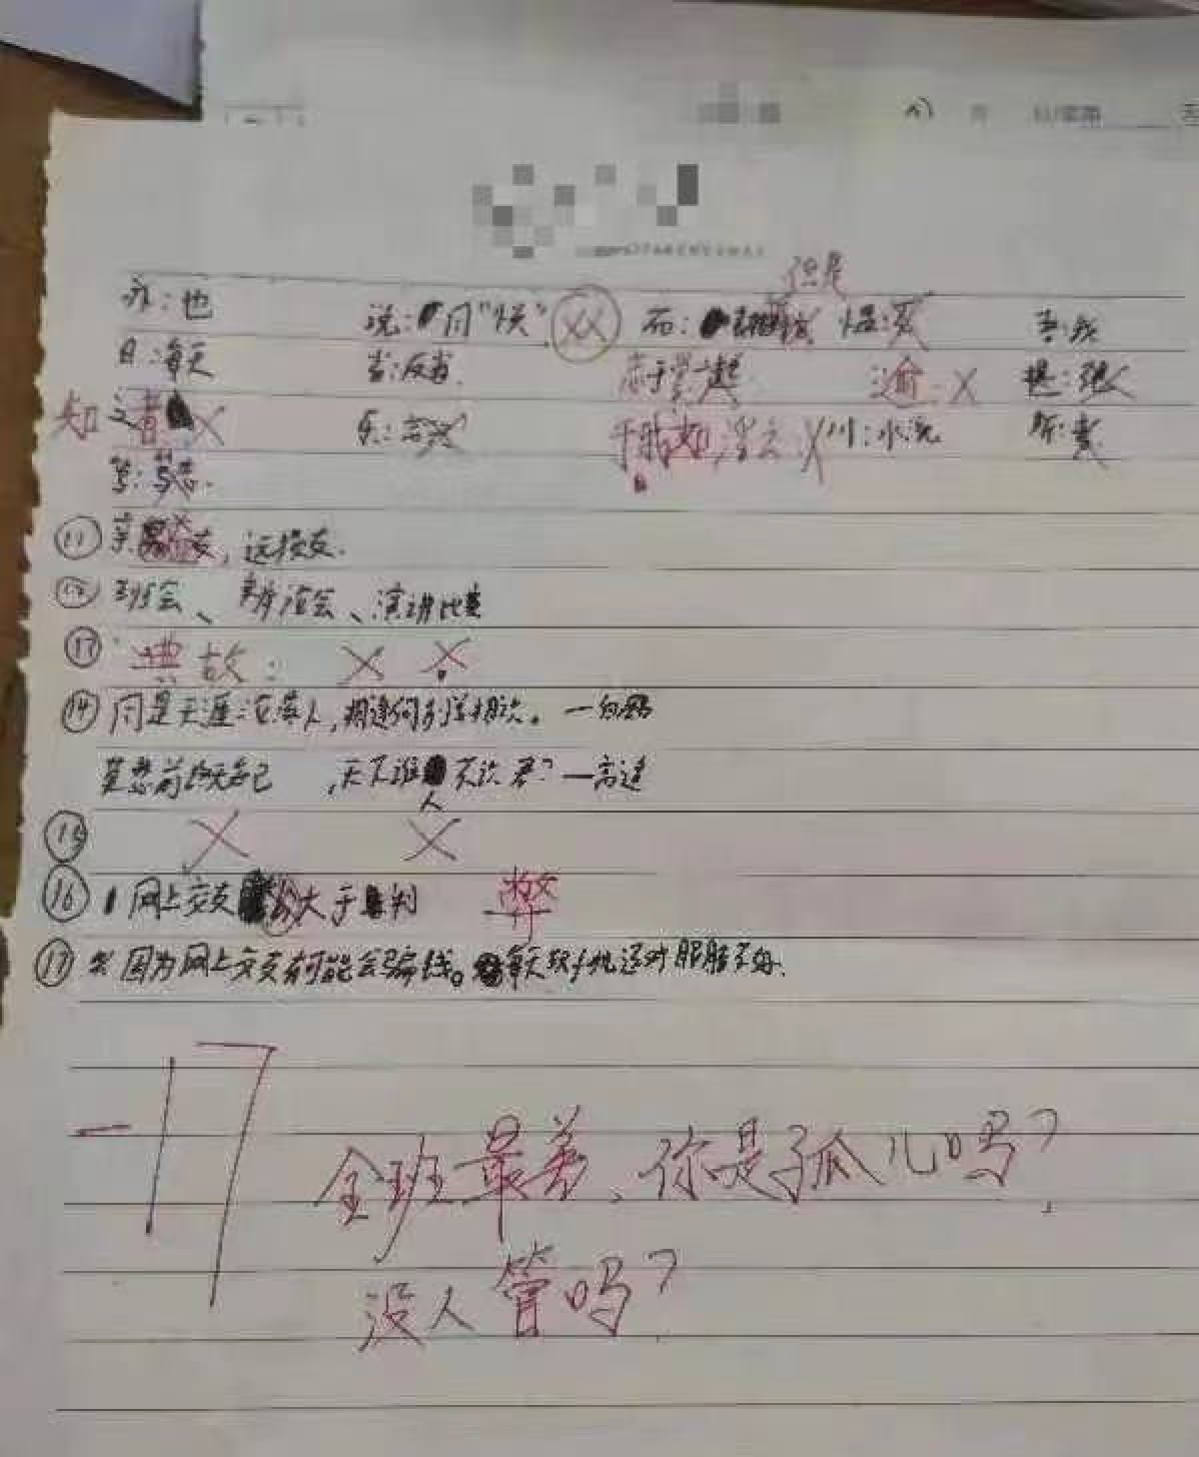 The teacher shamed his pupil by posting his heavily corrected assignment on a class group chat forum. Photo: The Paper